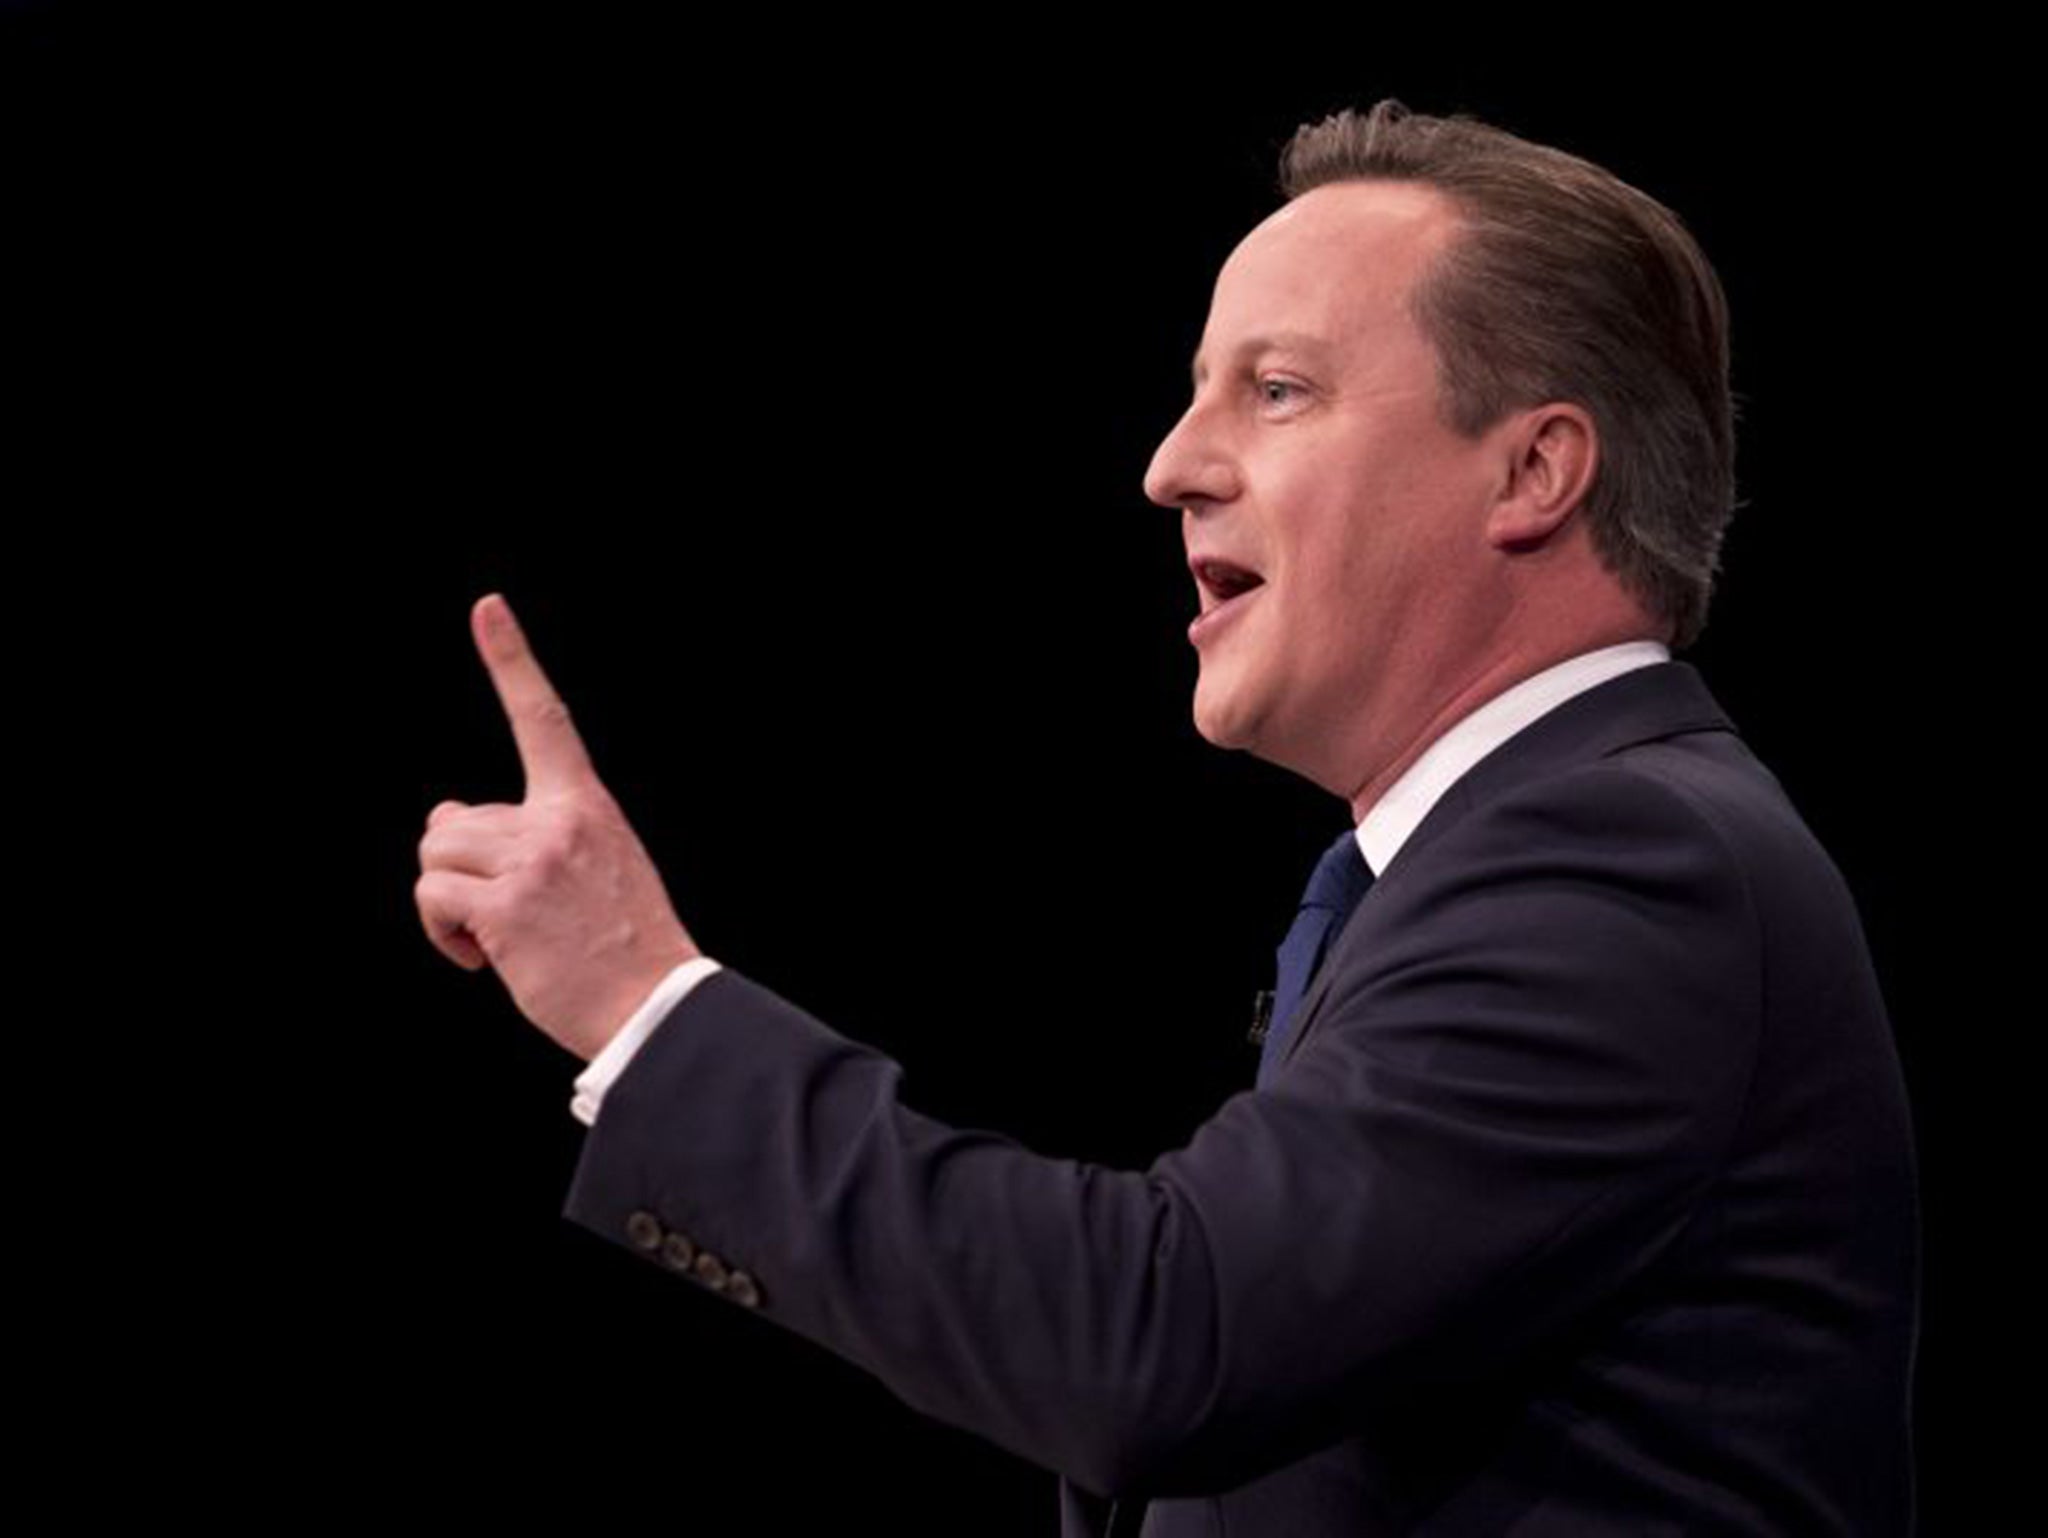 David Cameron delivers a speech to delegates at the annual Conservative Party Conference in Manchester